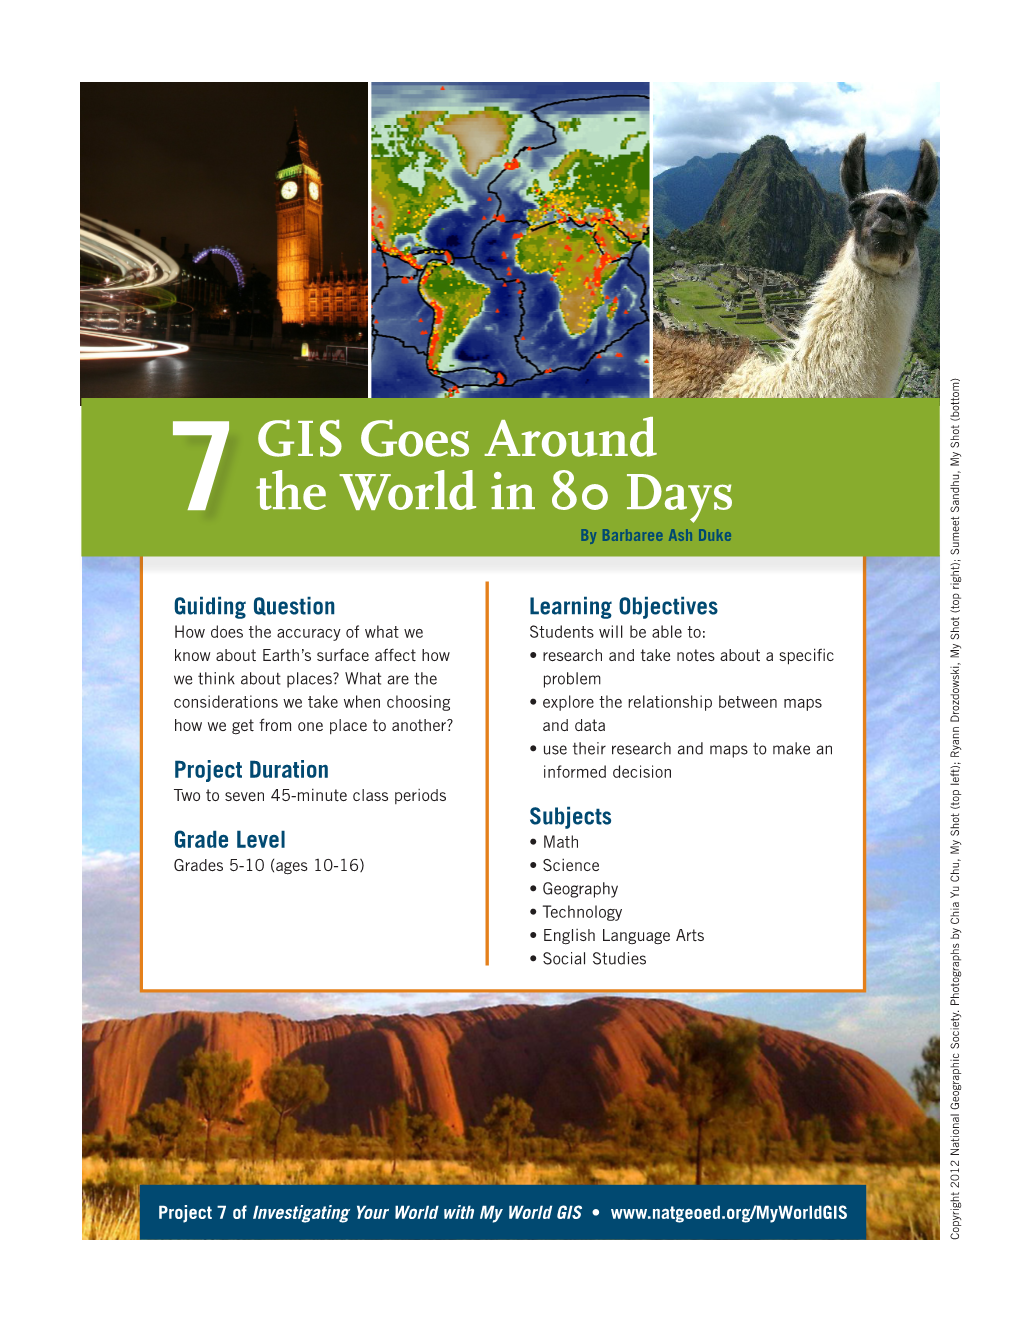 GIS Goes Around the World in 80 Days by Barbaree Ash Duke